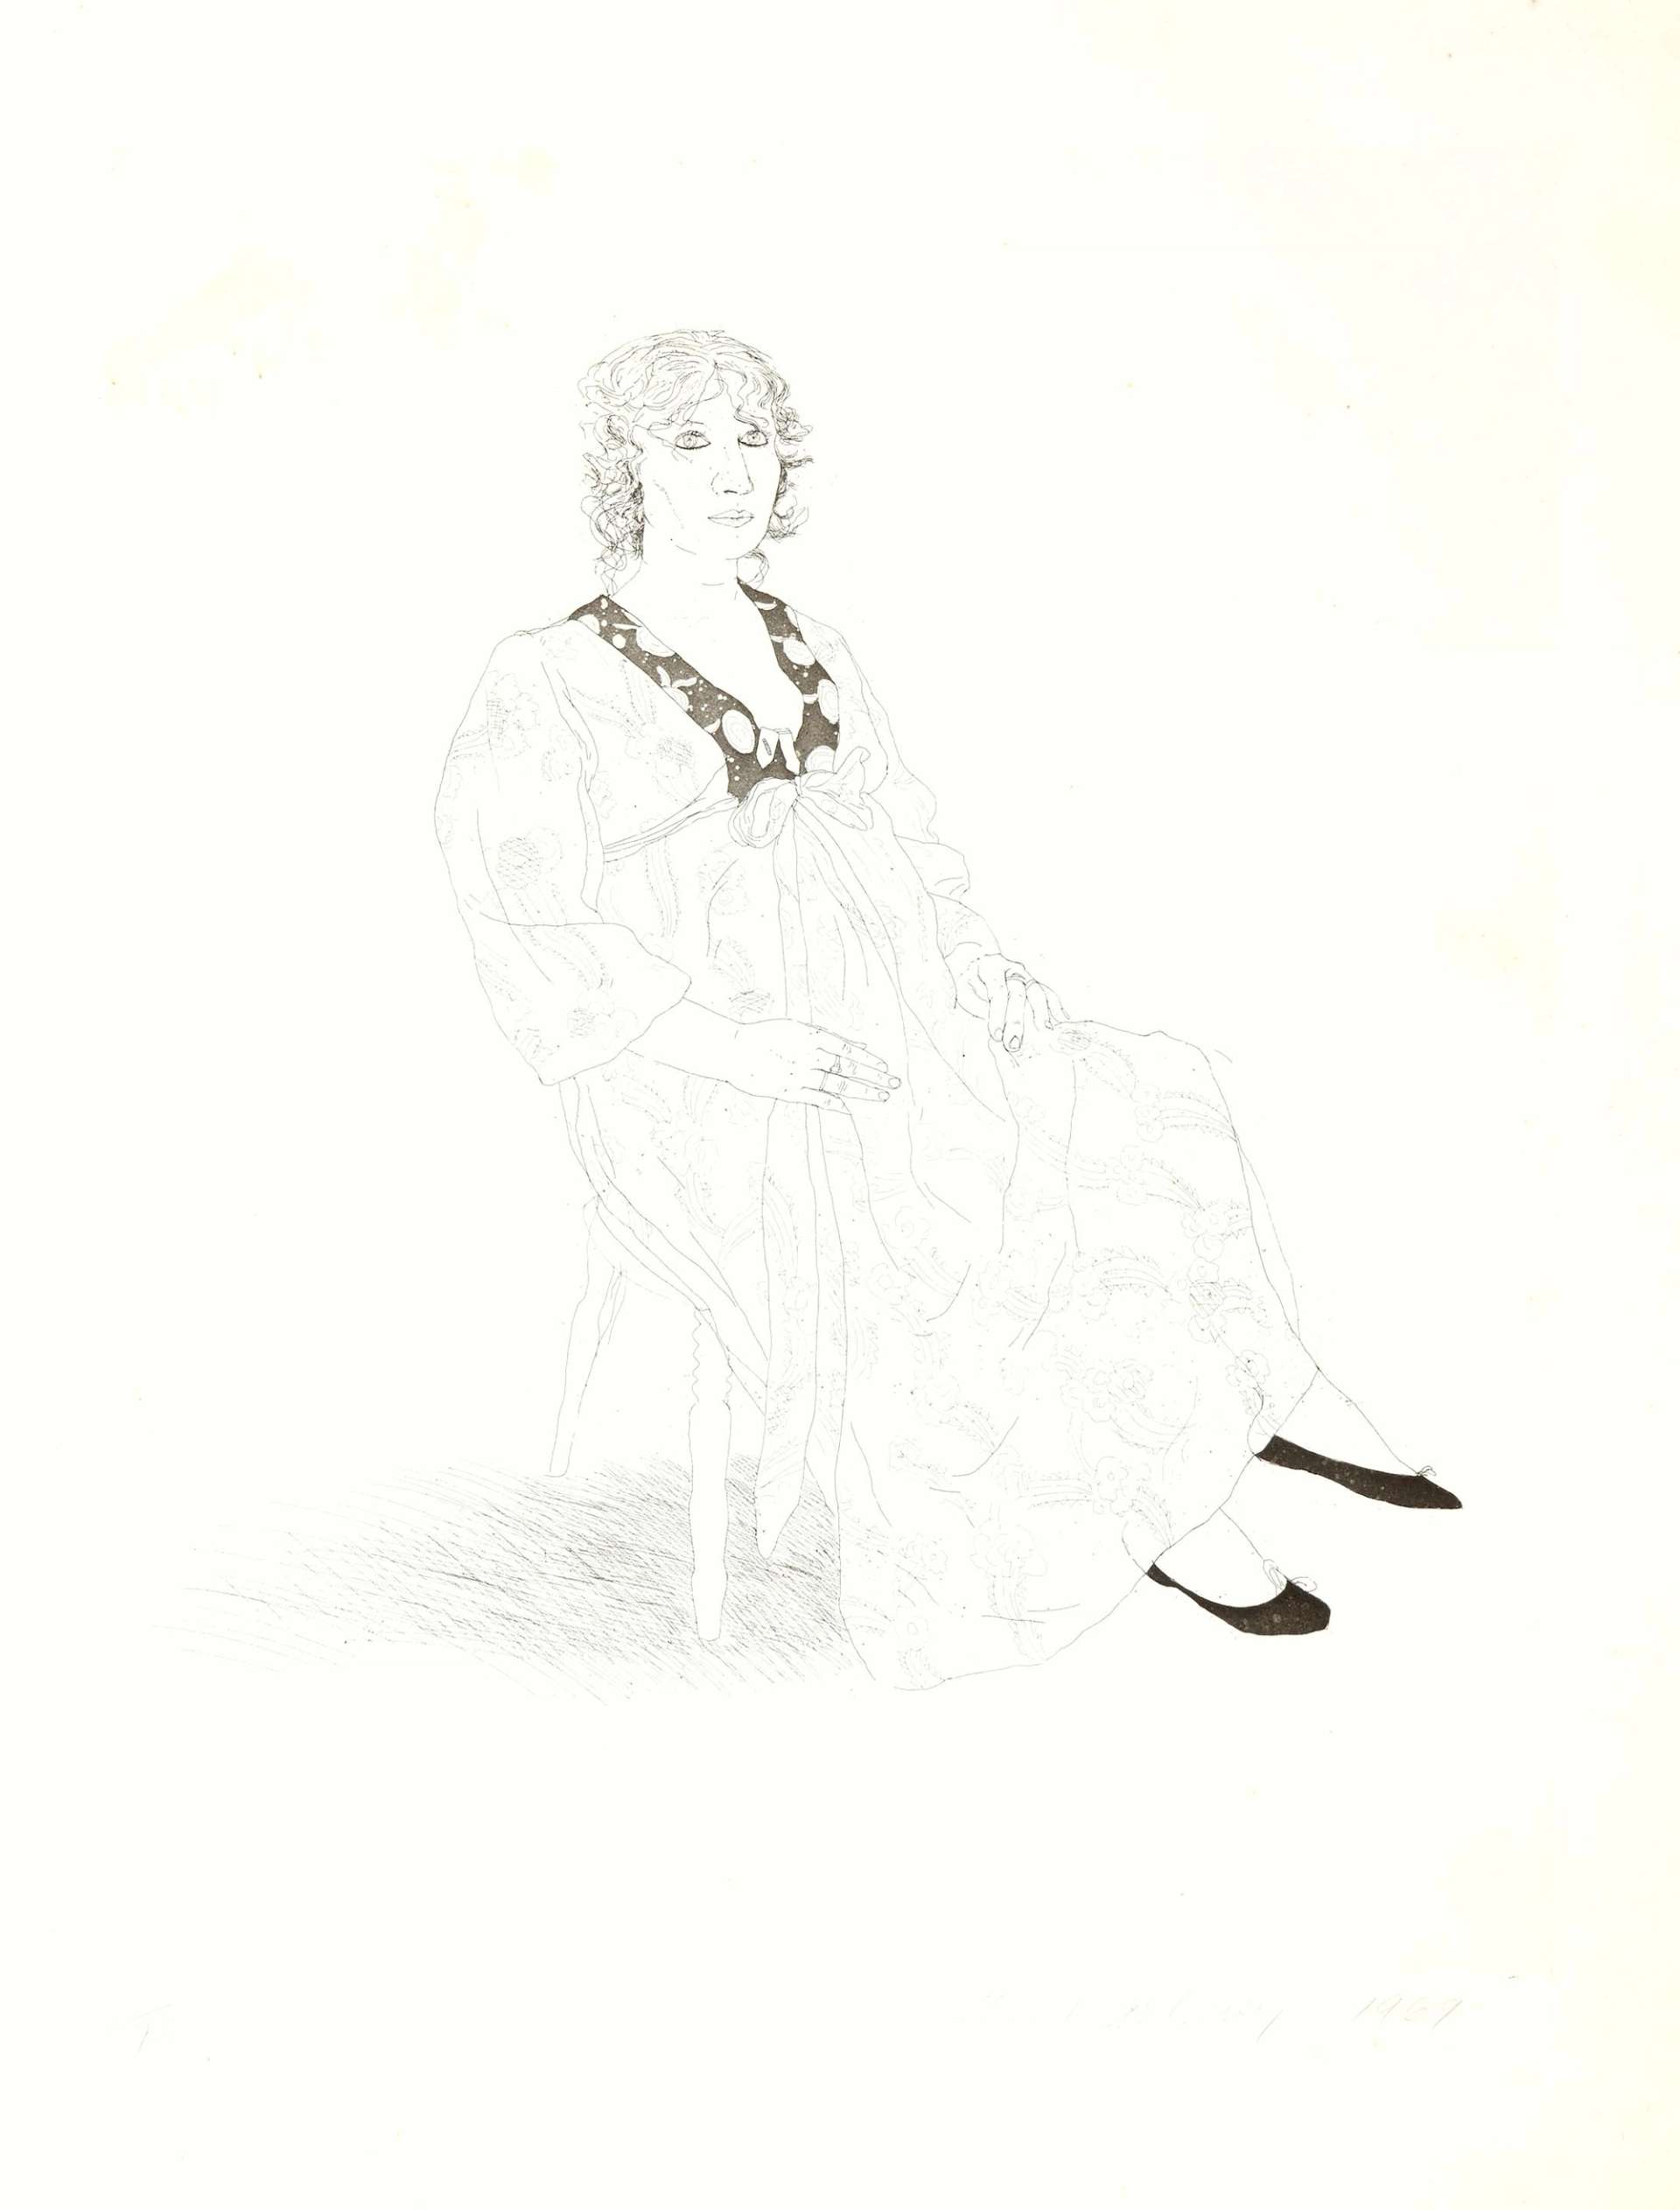 David Hockney’s Celia. An etching of a woman in a long dress seated in a chair. 